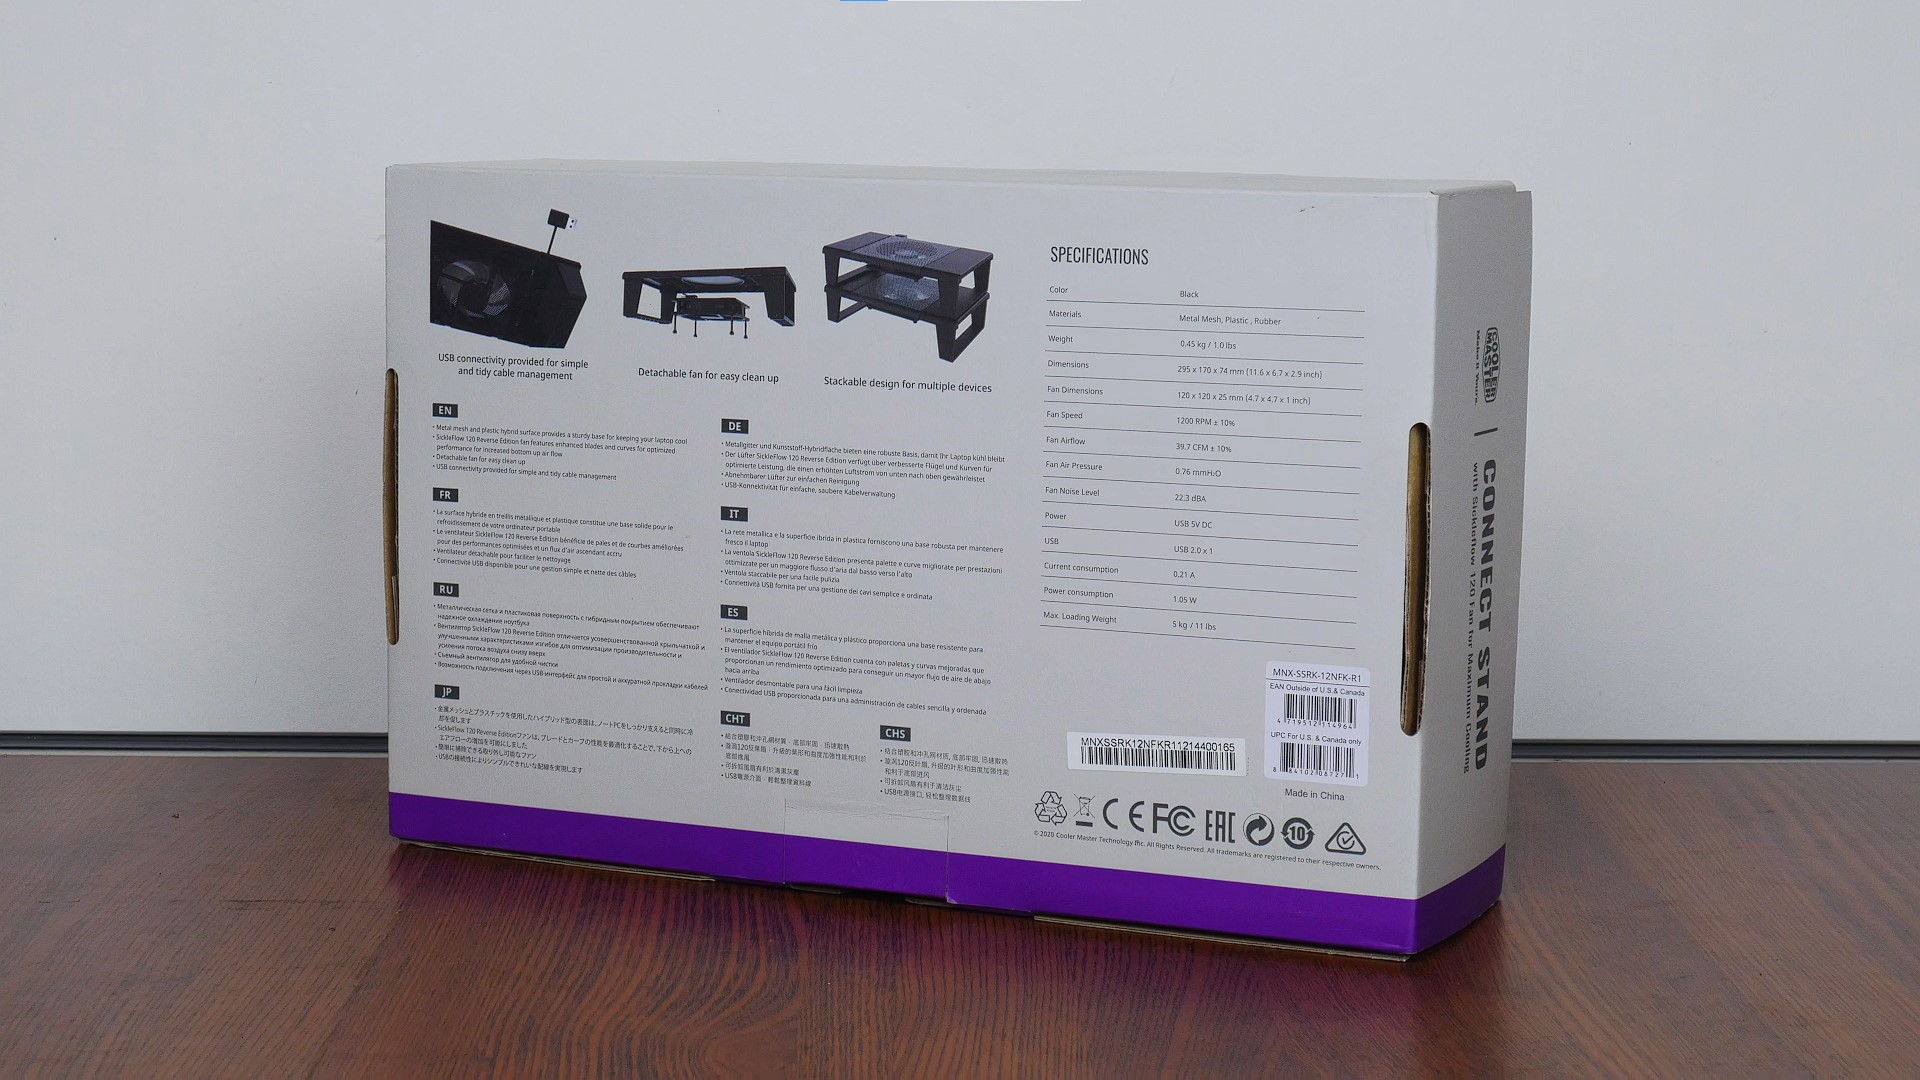 Cooler Master Connect Stand Packaging (Rear)